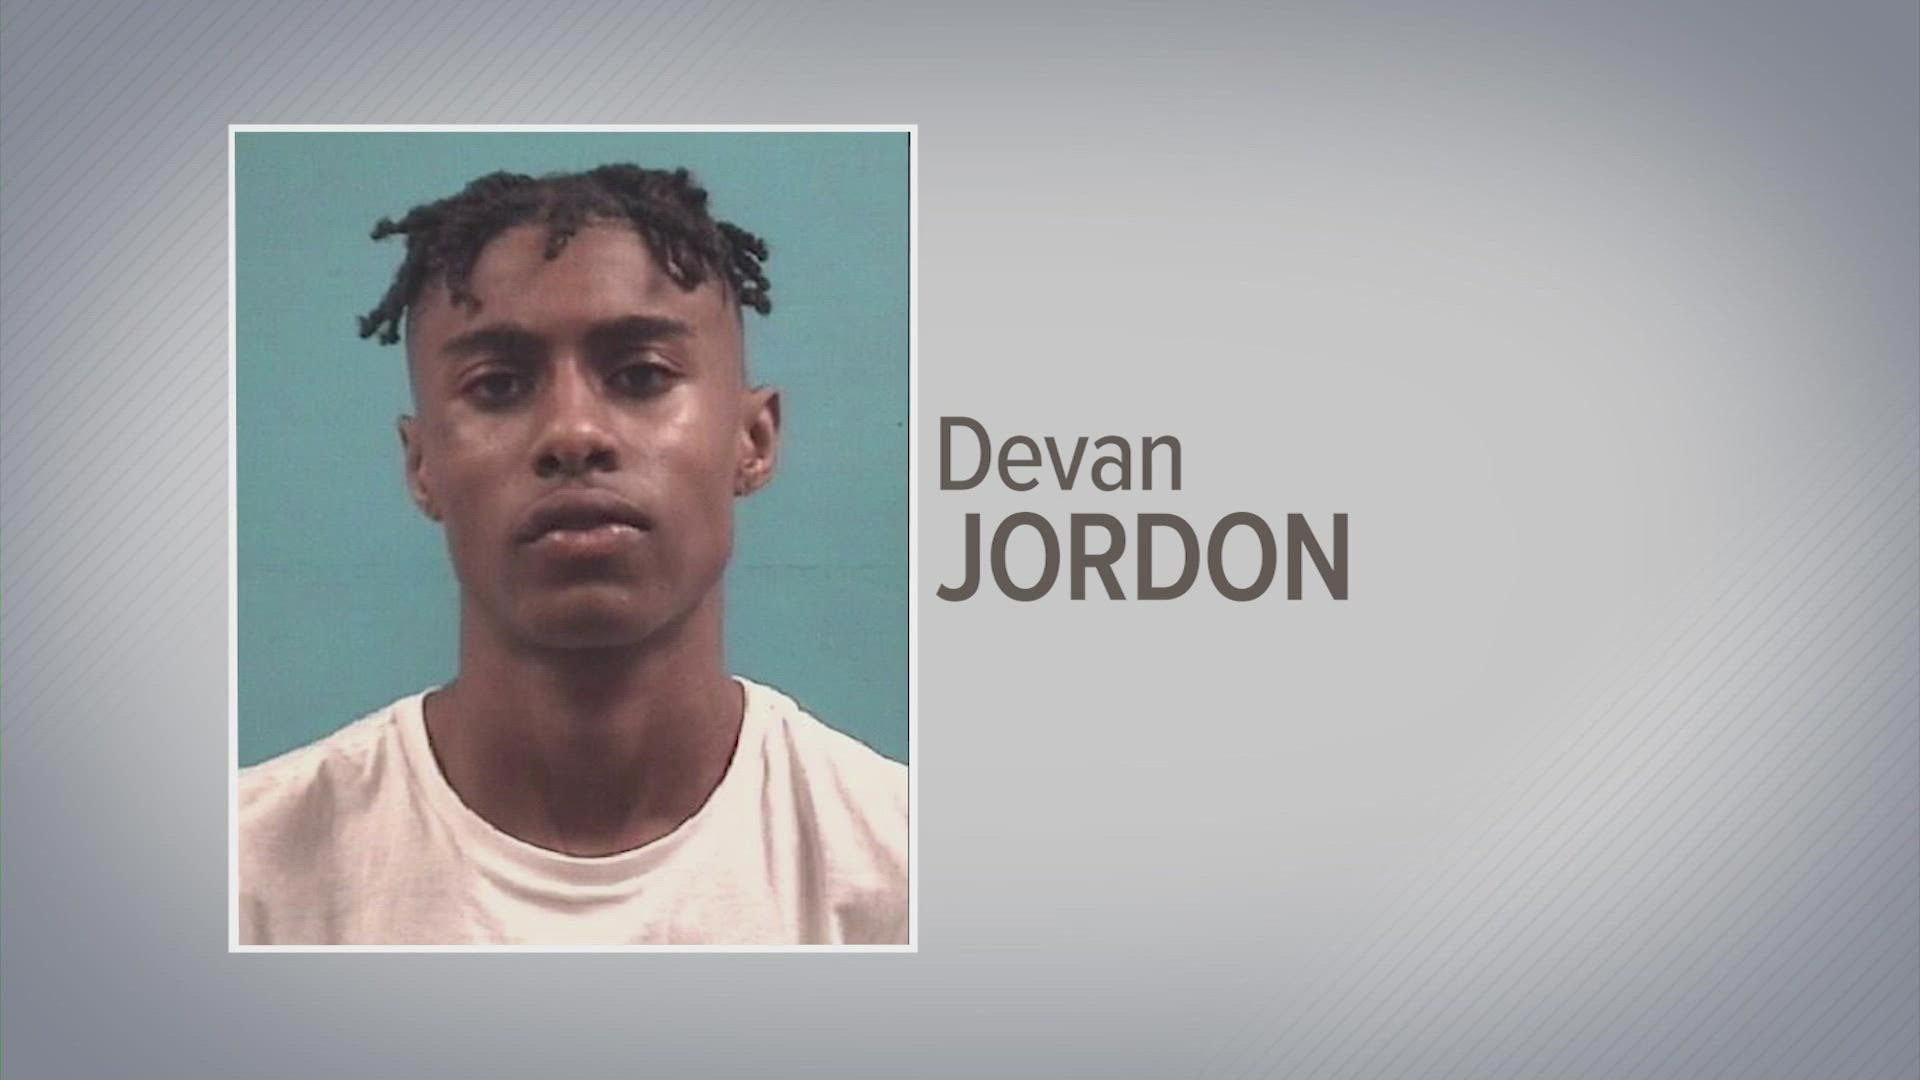 Devan Jordon, 21, was out on bond for another robbery and capital murder case when he was arrested in connection with the League City murder.